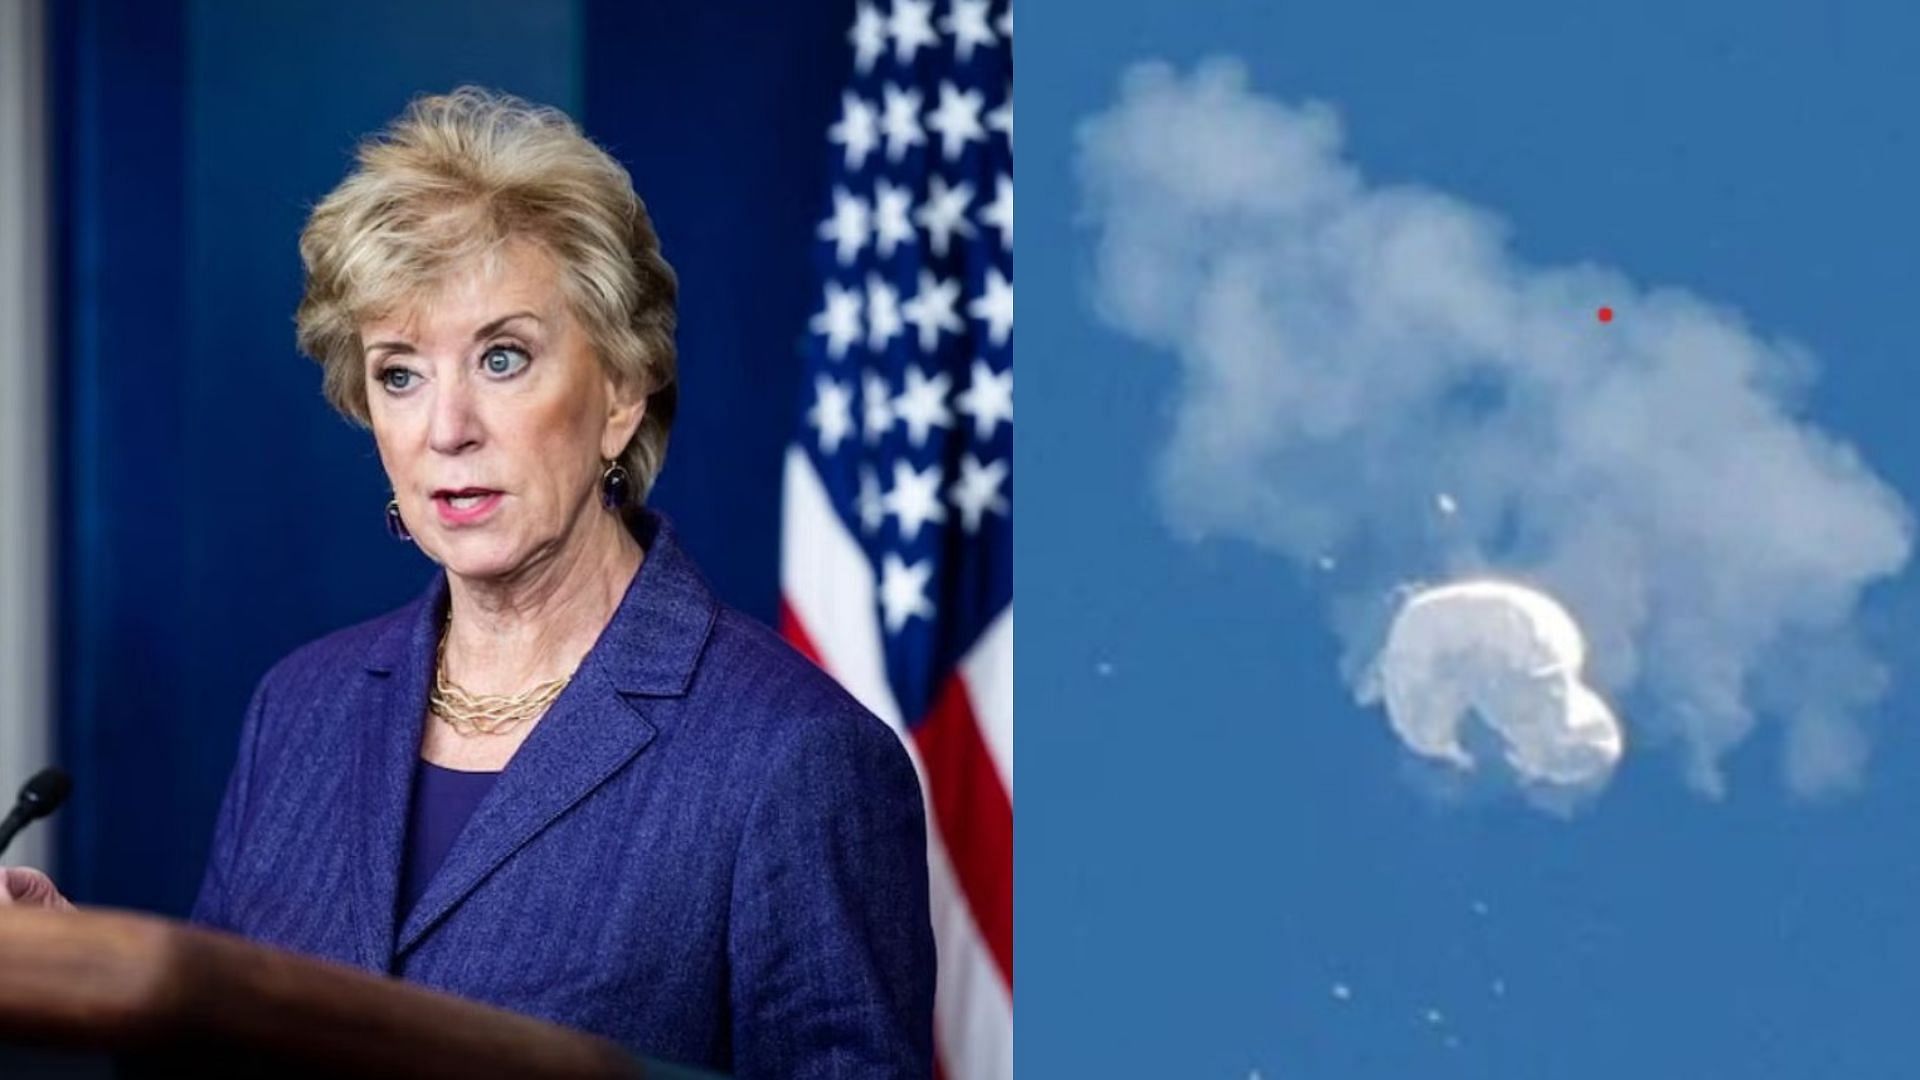 Linda McMahon gave a heated opinion on the Chinese Spy Balloon incident